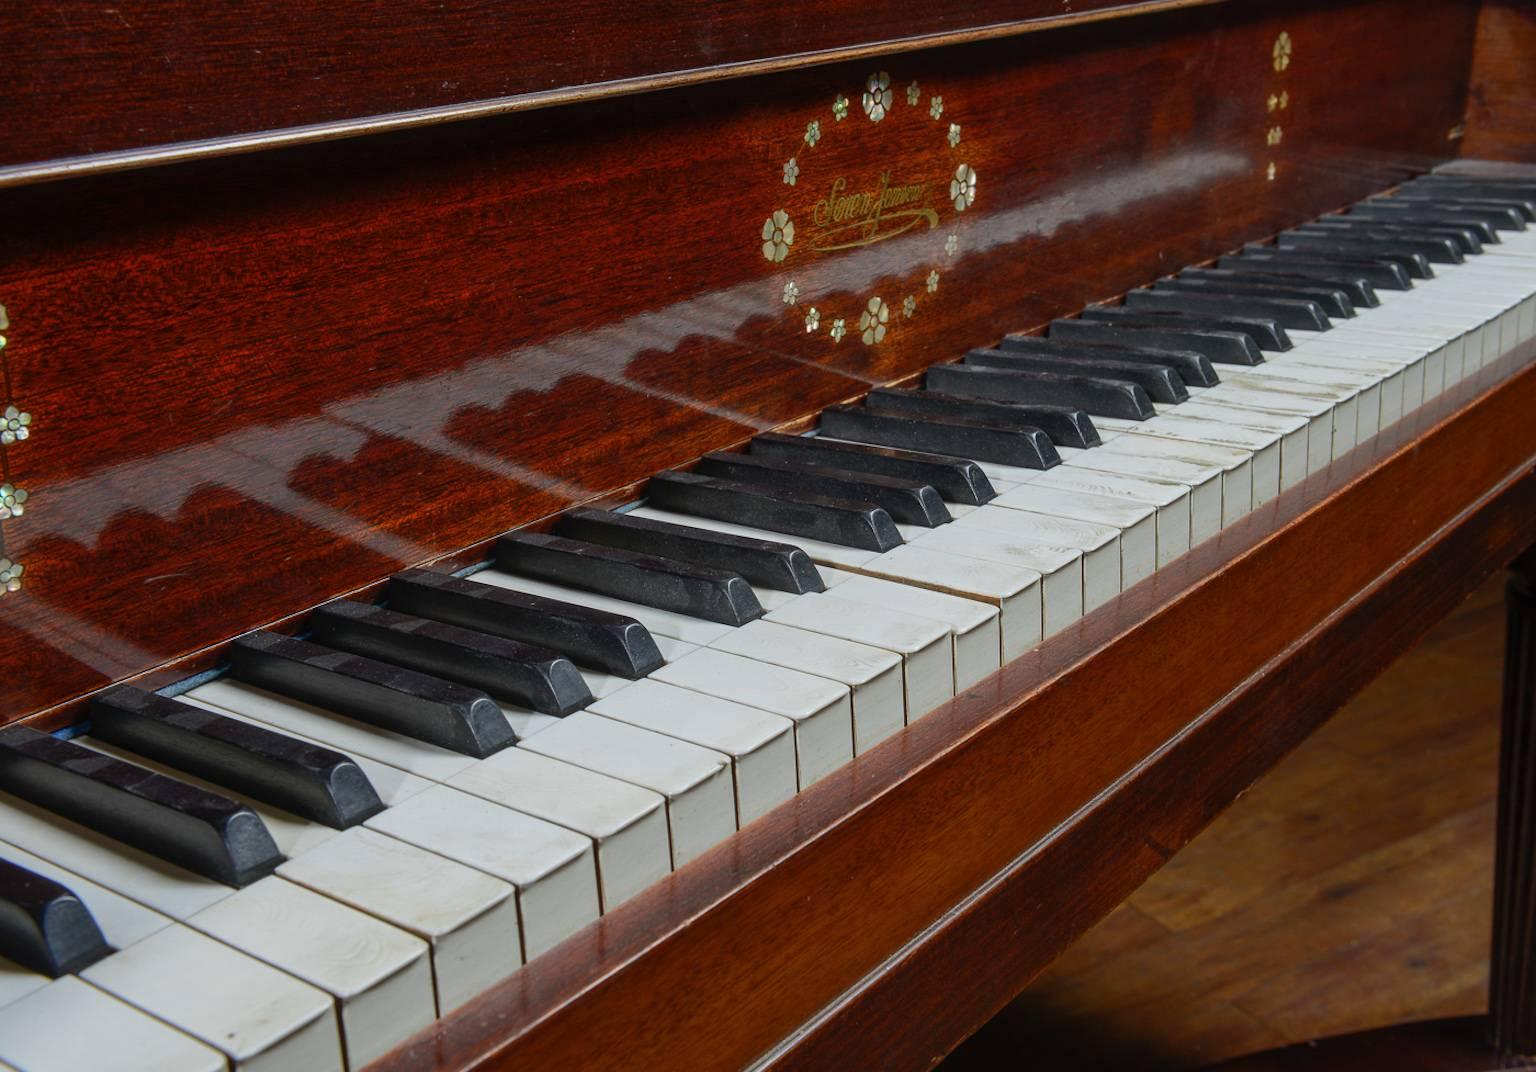 Beautiful baby grand piano made by a well-known Danish company, Soren Jensen, in the 1920's, with an unusual case design in that the lids take the form of butterfly wings when raised. The case is mahogany with mother-of-pearl inlay. Please note that